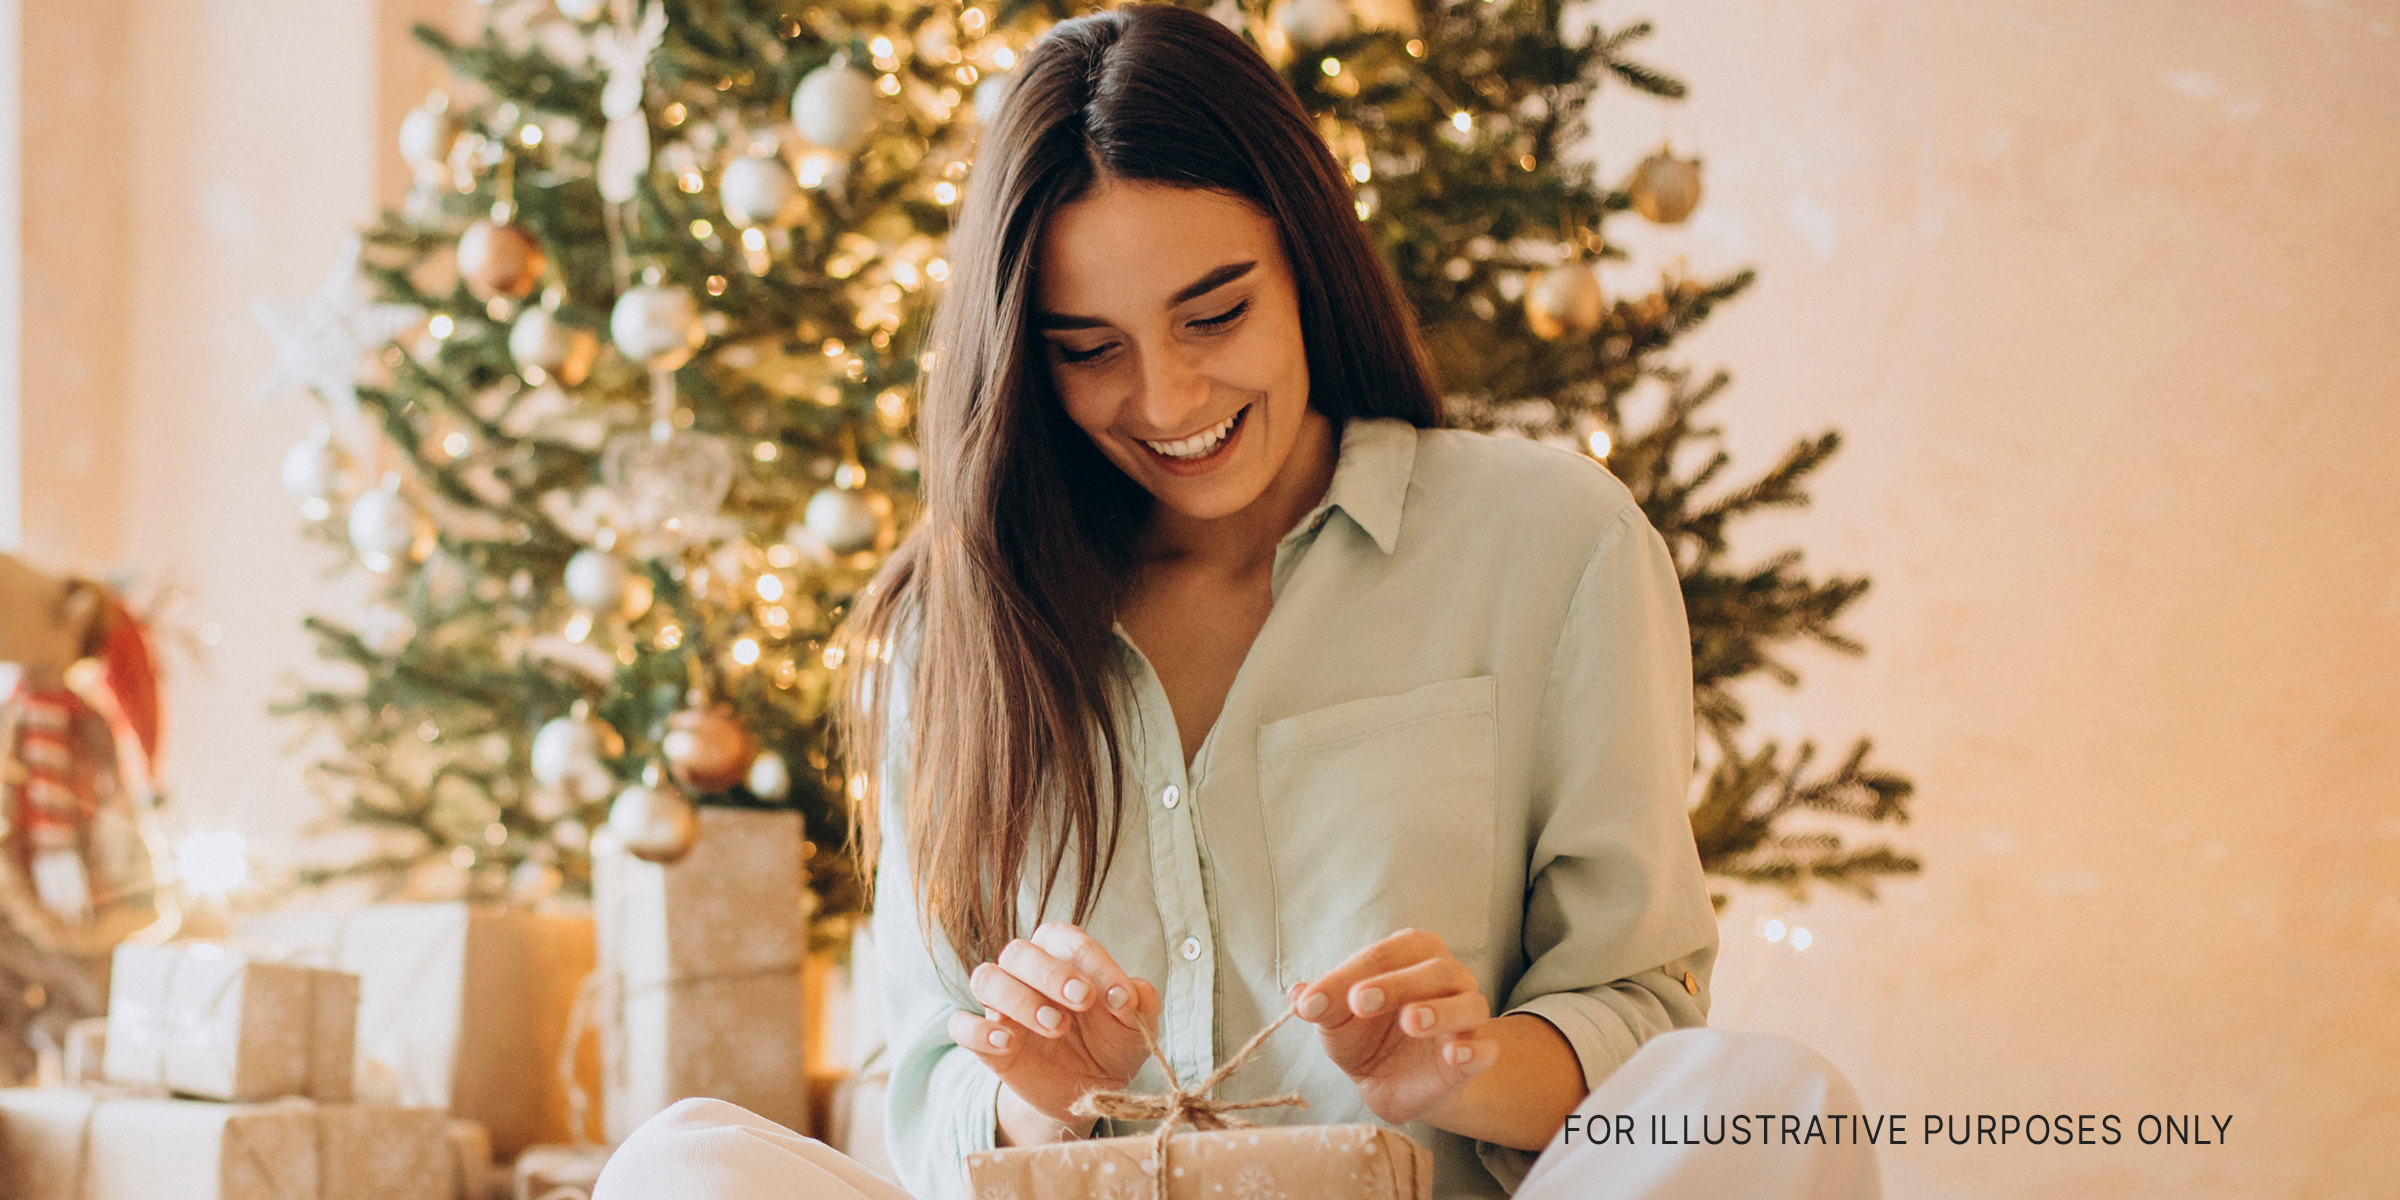 Woman unwrapping a gift | Source: Shutterstock